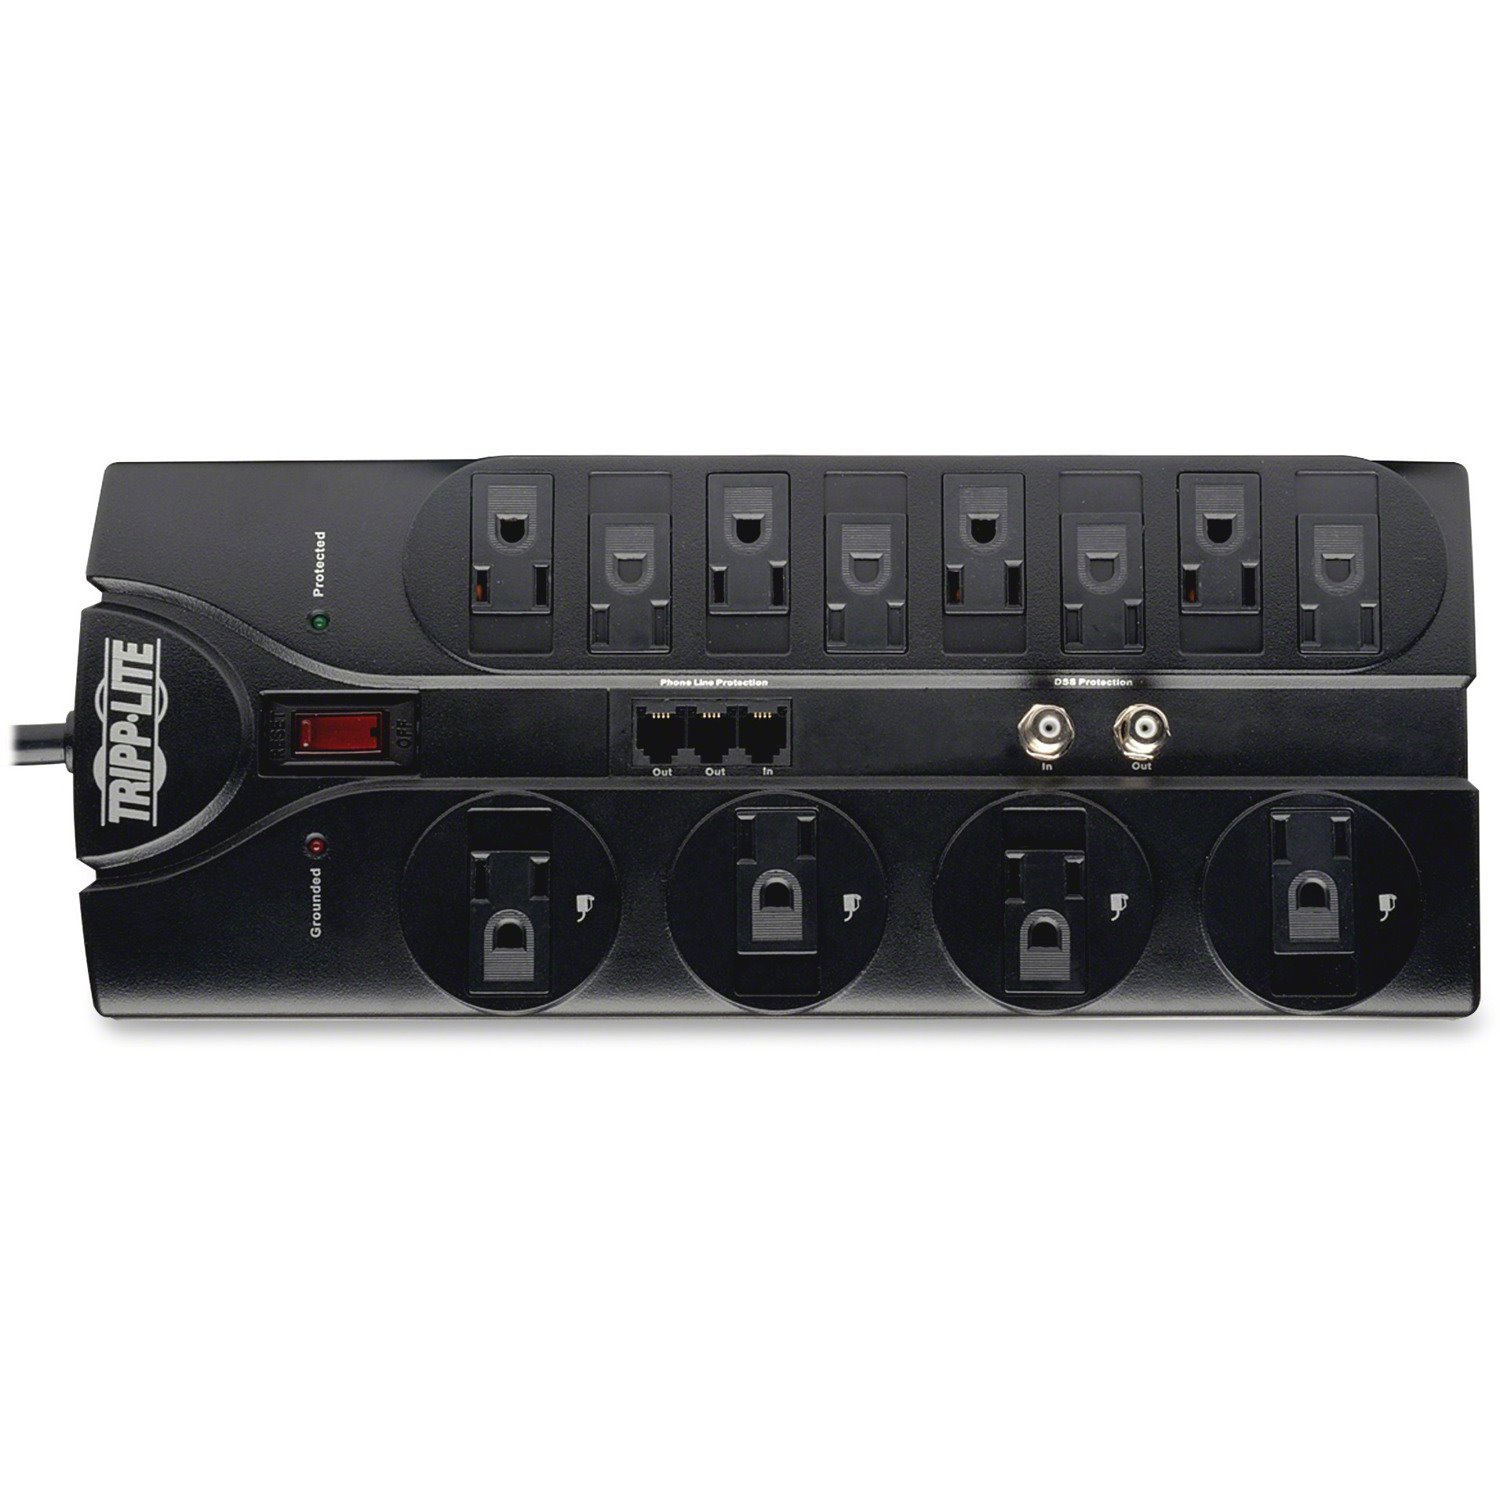 Eaton Tripp Lite Series Protect It! 12-Outlet Surge Protector, 8 ft. (2.43 m) Cord, 2880 Joules, Tel/Modem/Coaxial Protection